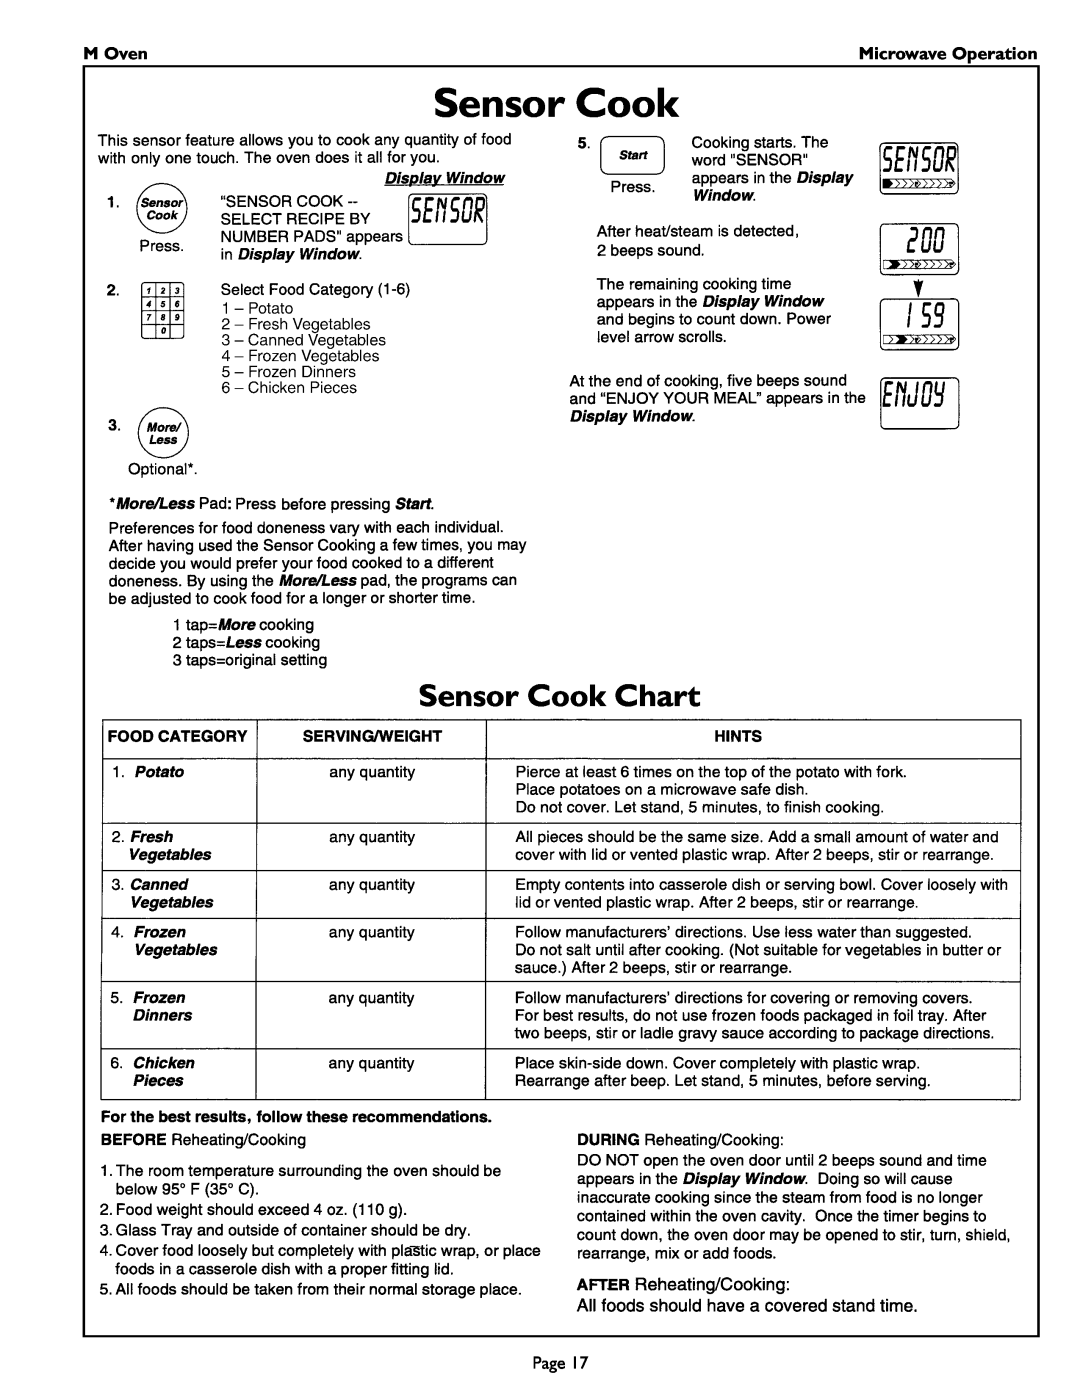 Thermador MT27 manual Sensor Cook Chart, M Oven, Microwave Operation 